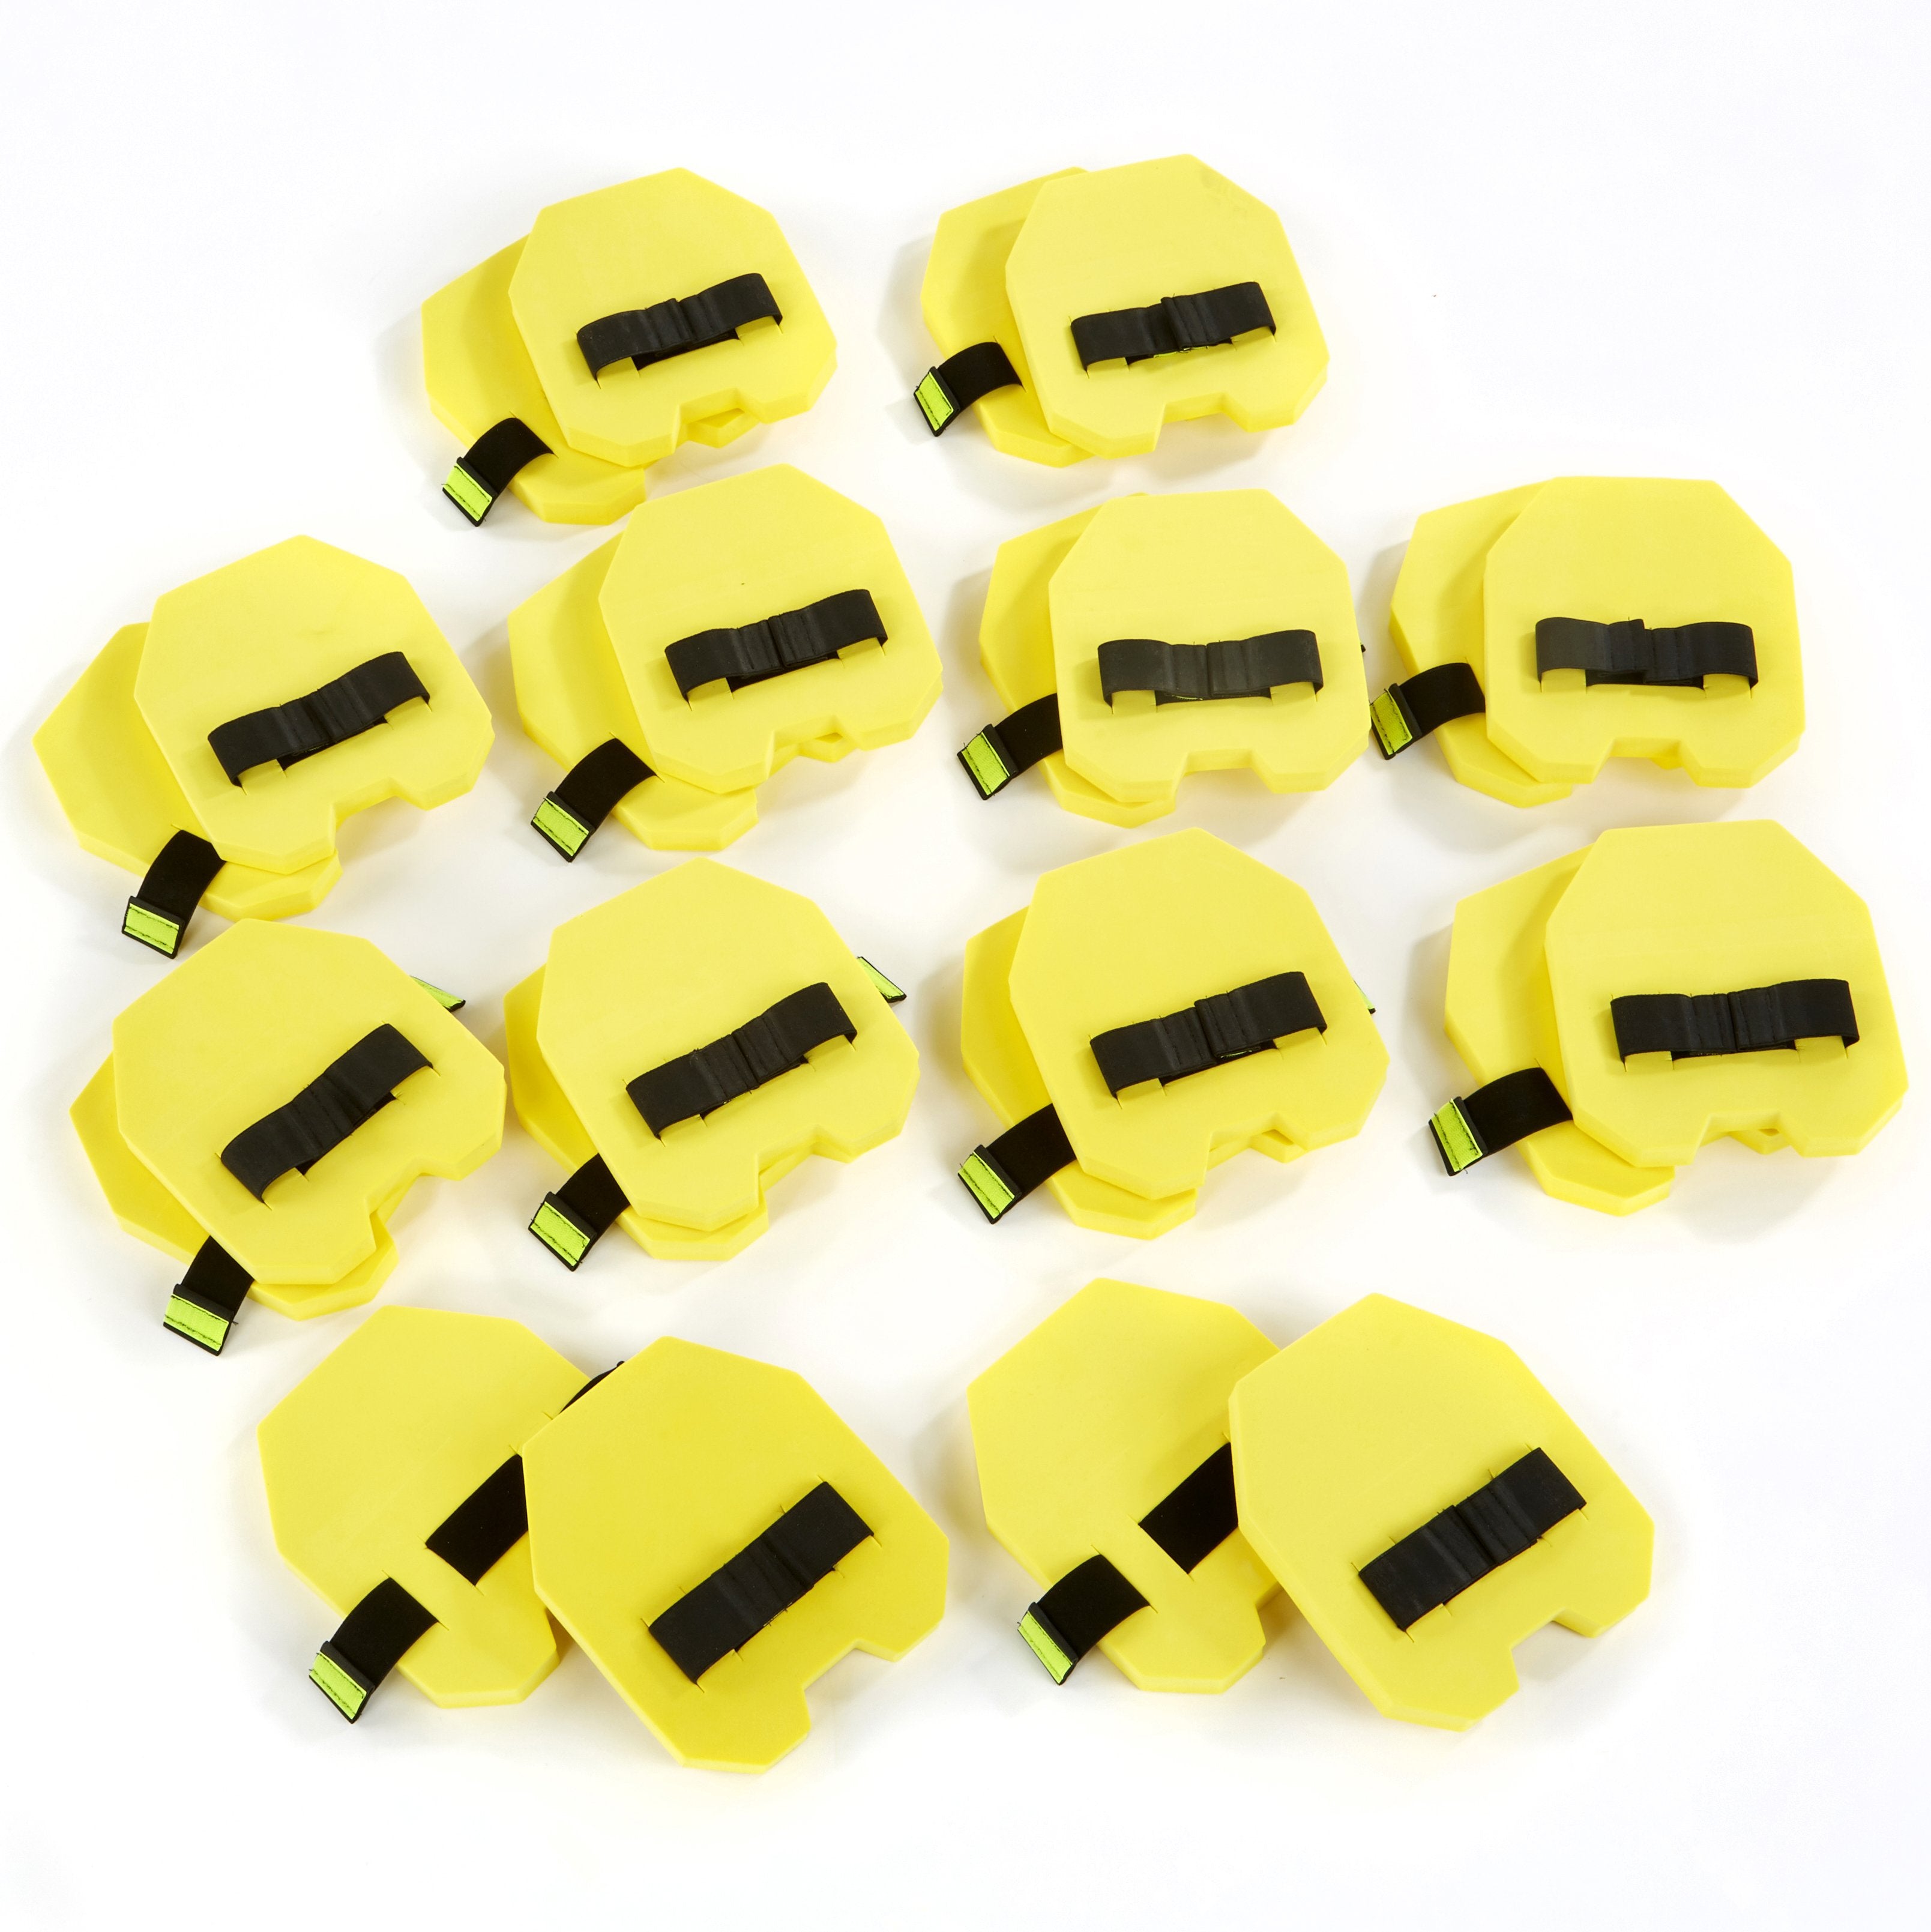 Hitting Hands early years coaching aids in yellow - 12 pair class set